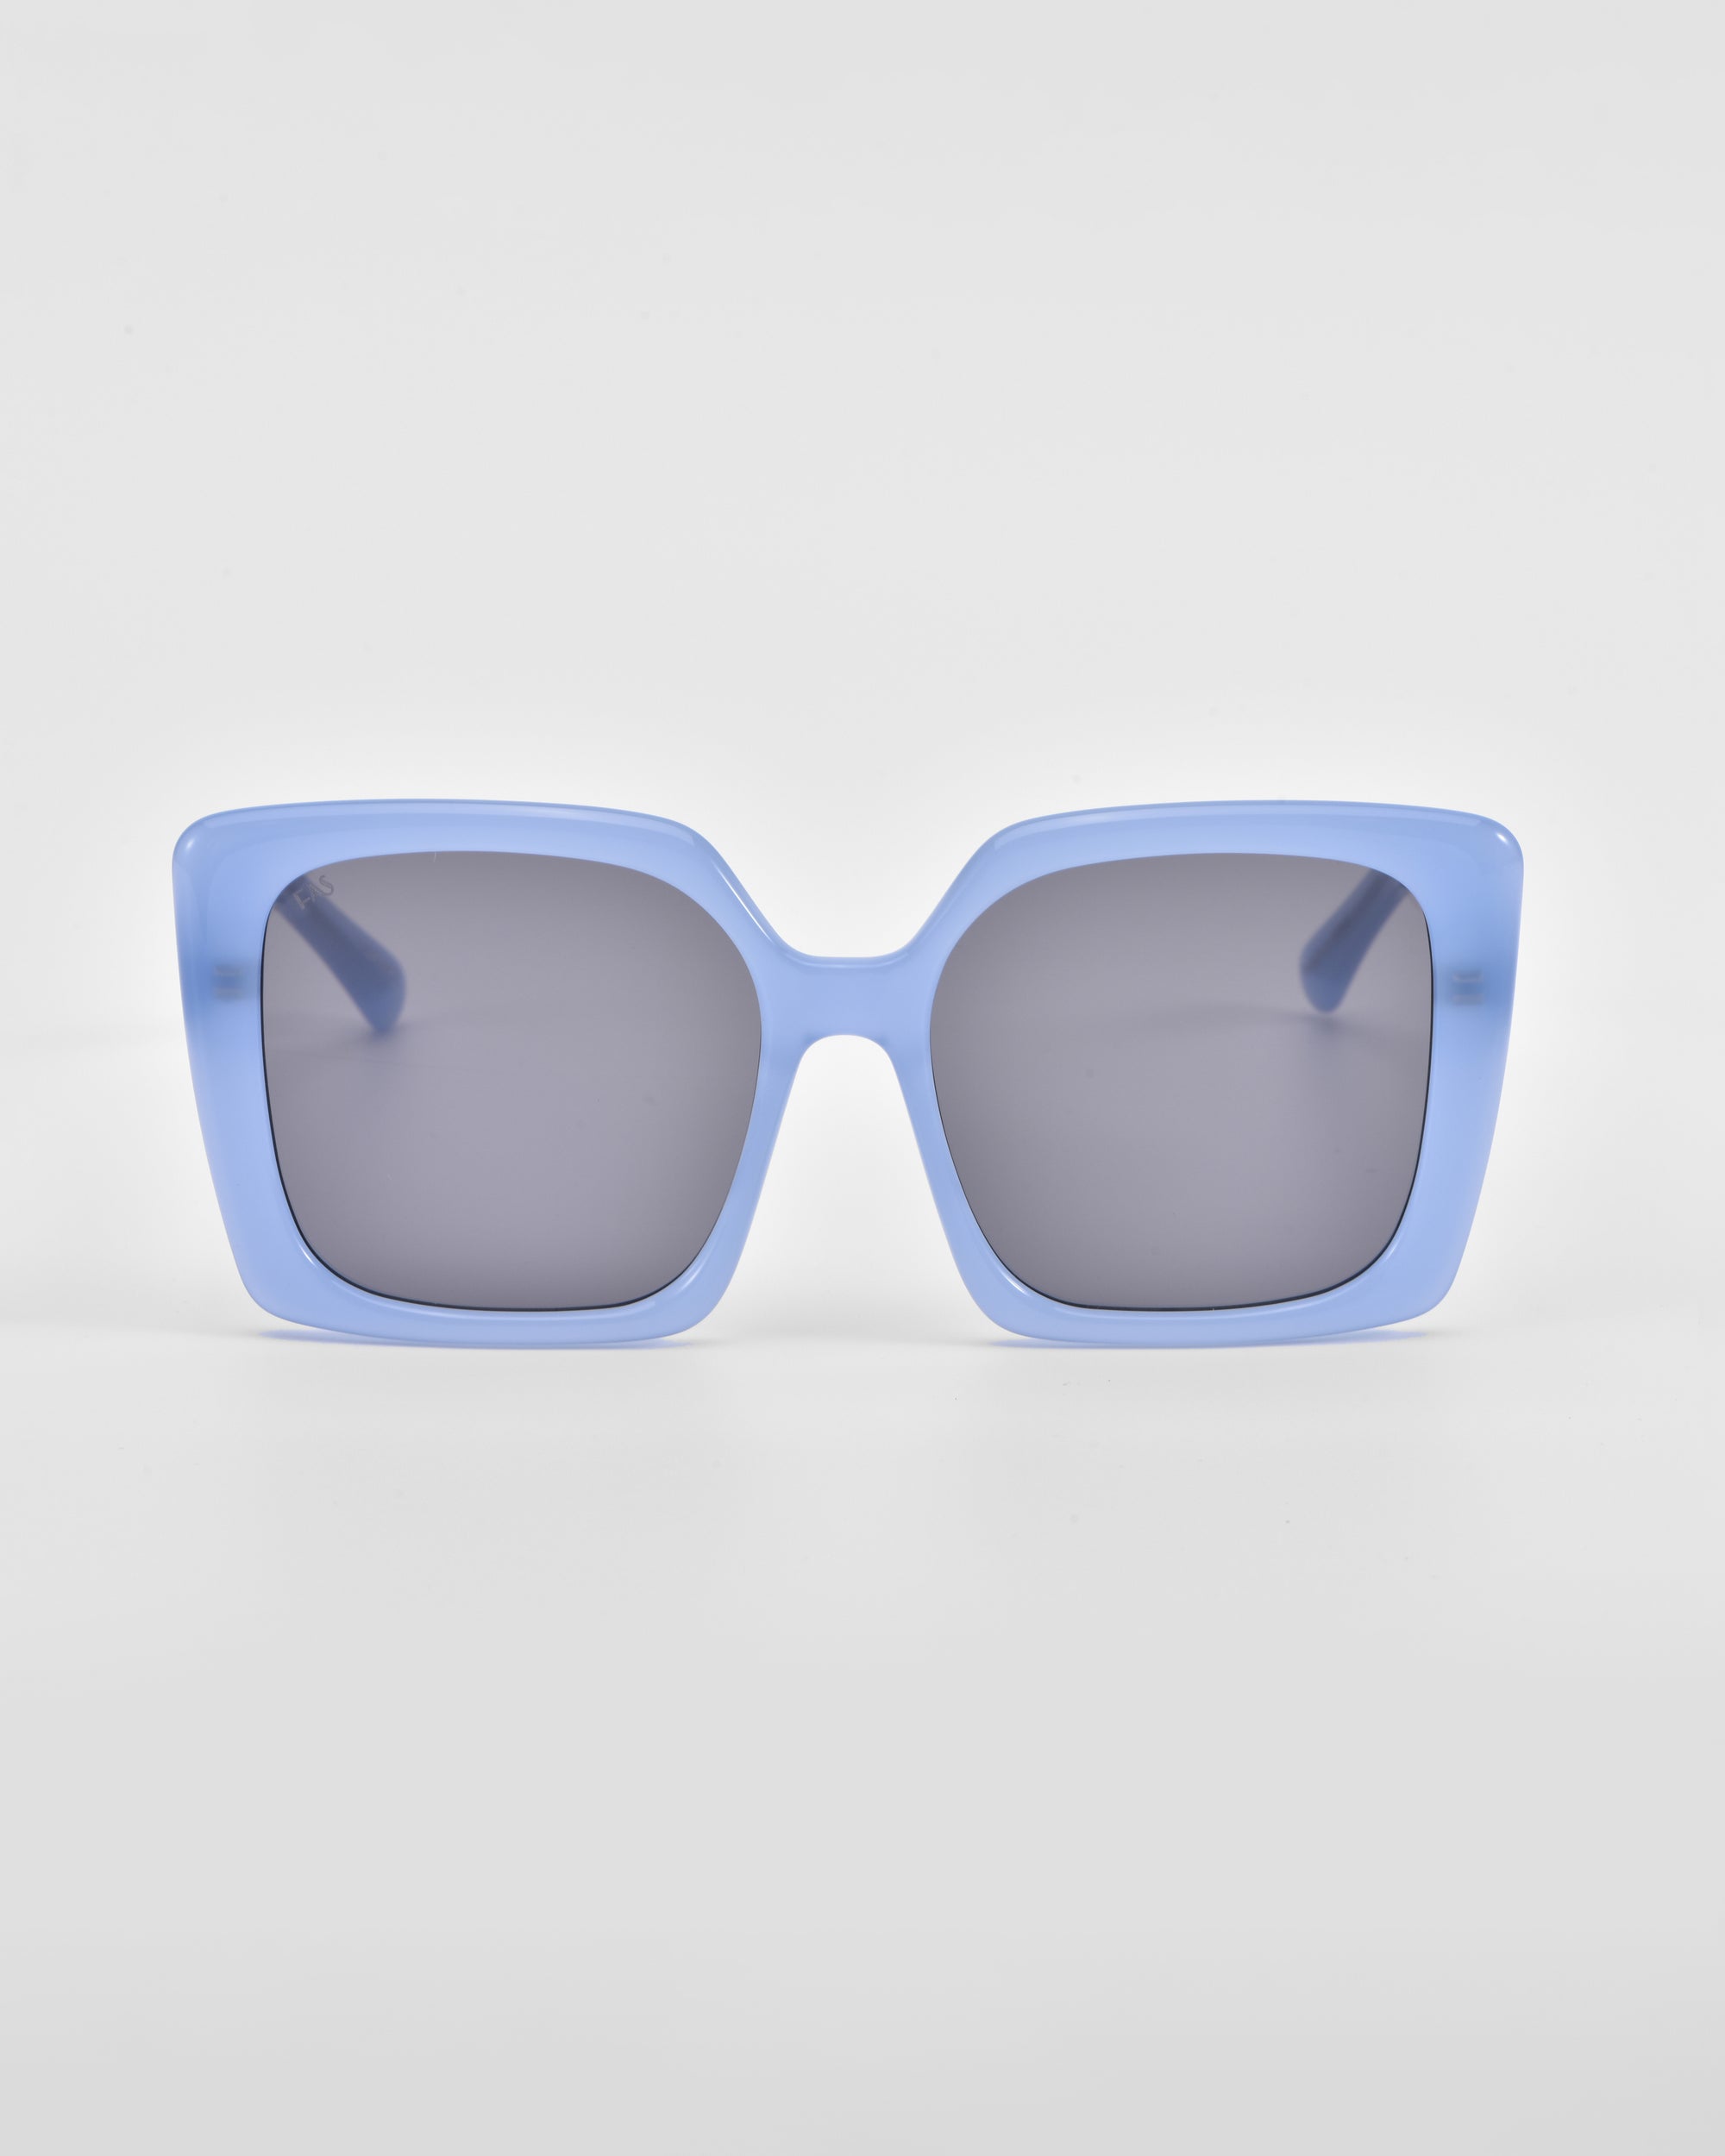 A pair of oversized, square For Art's Sake® Eos sunglasses with light blue frames and dark lenses against a white background.